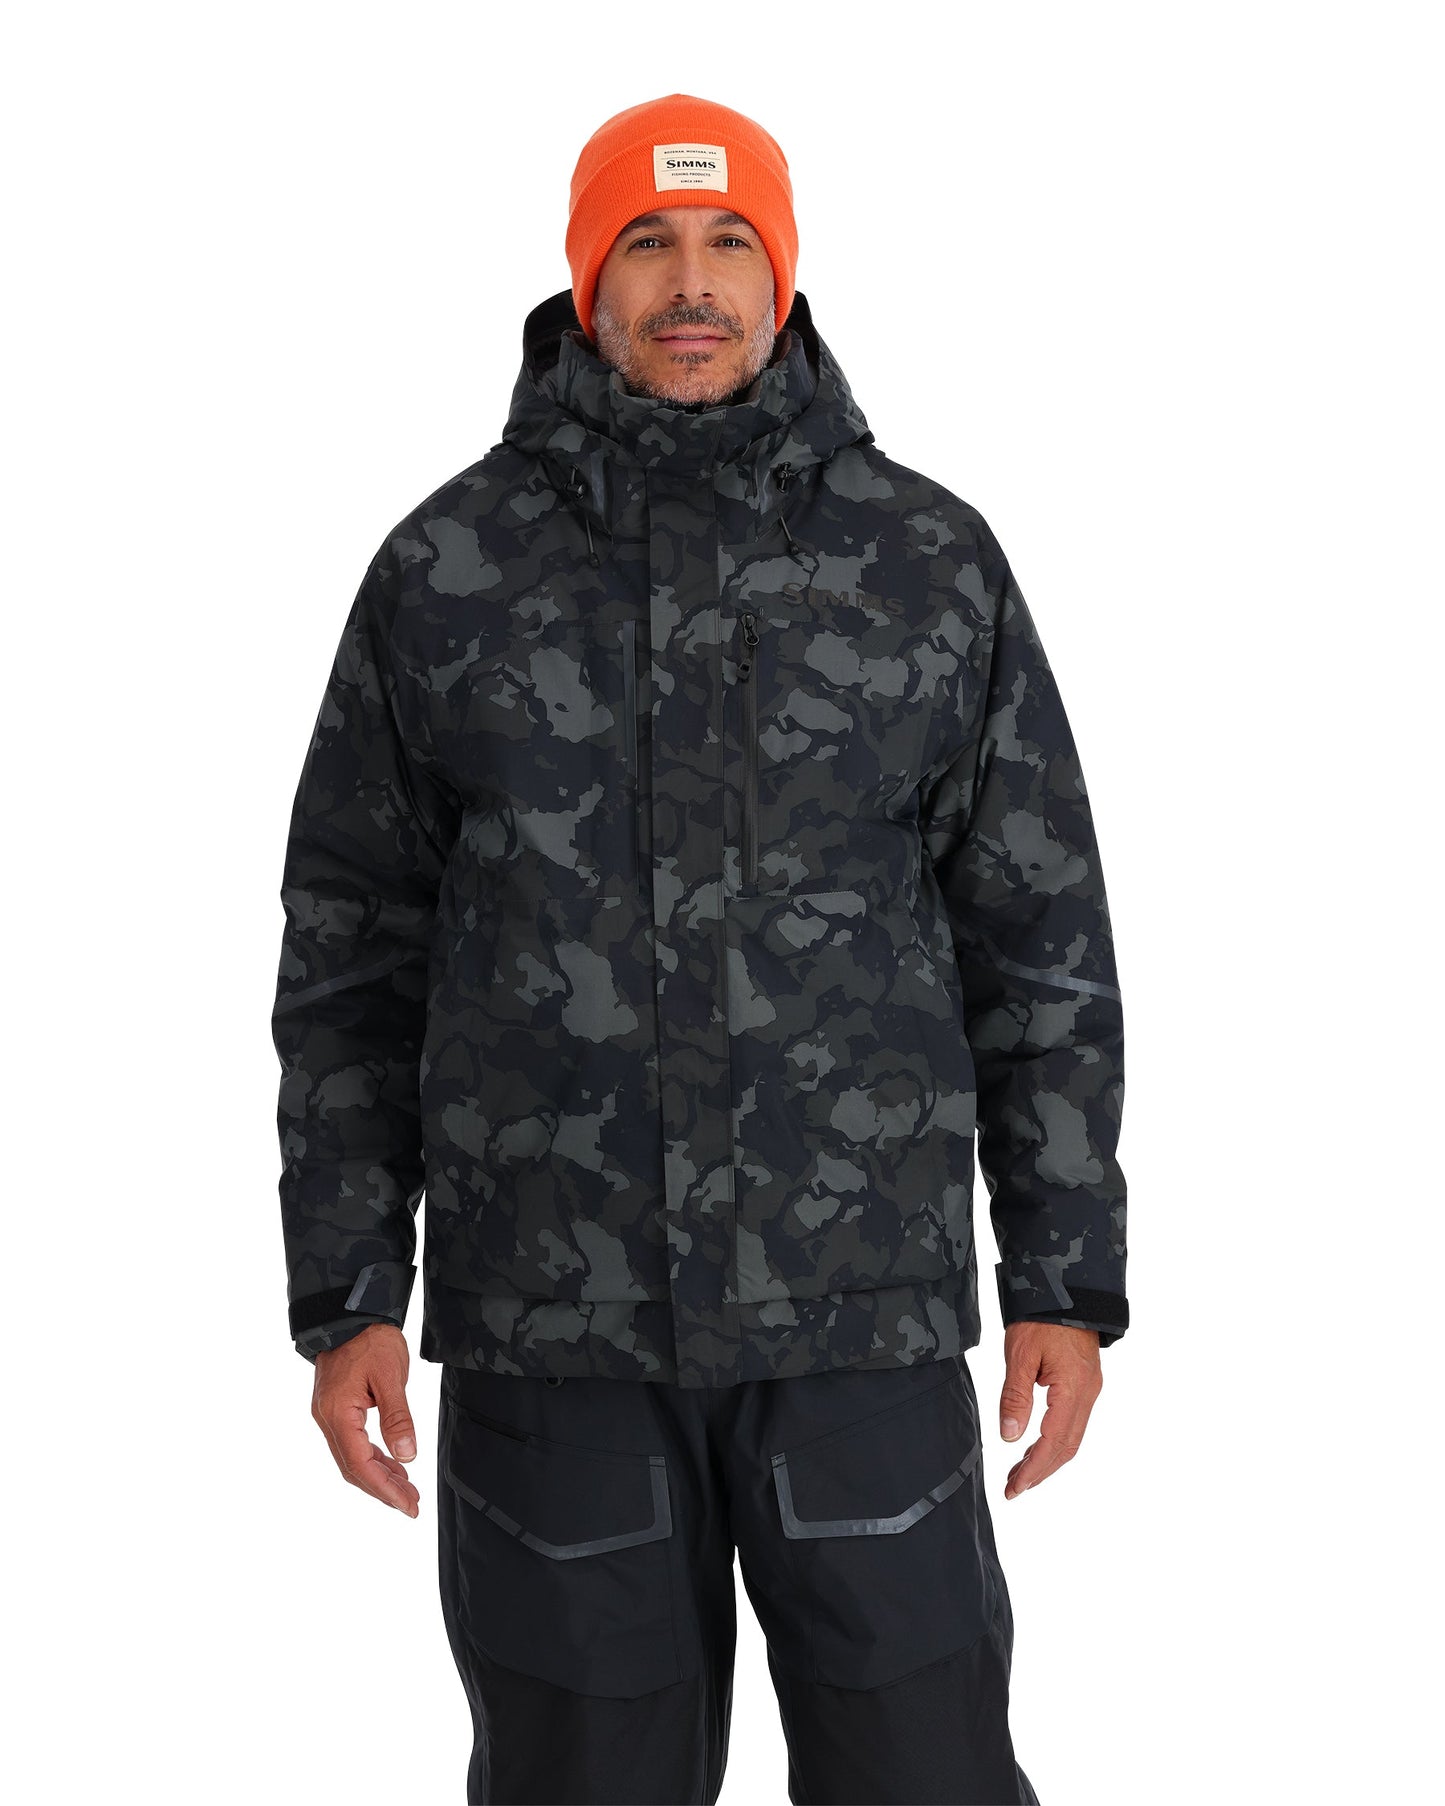 Simms Challenger Insulated Jacket, woodland camo, Fly Fishing